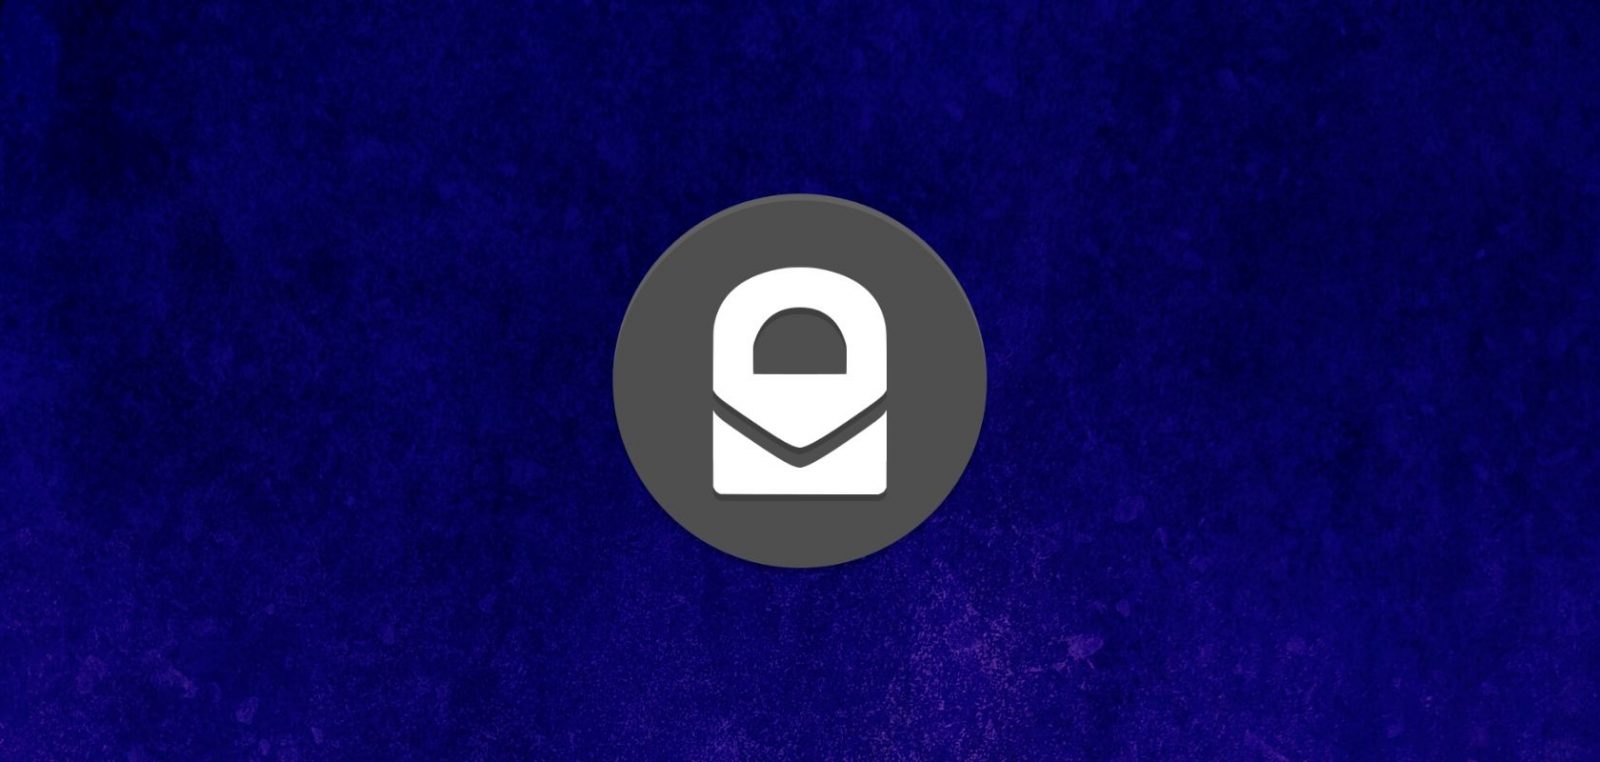 protonmail sign